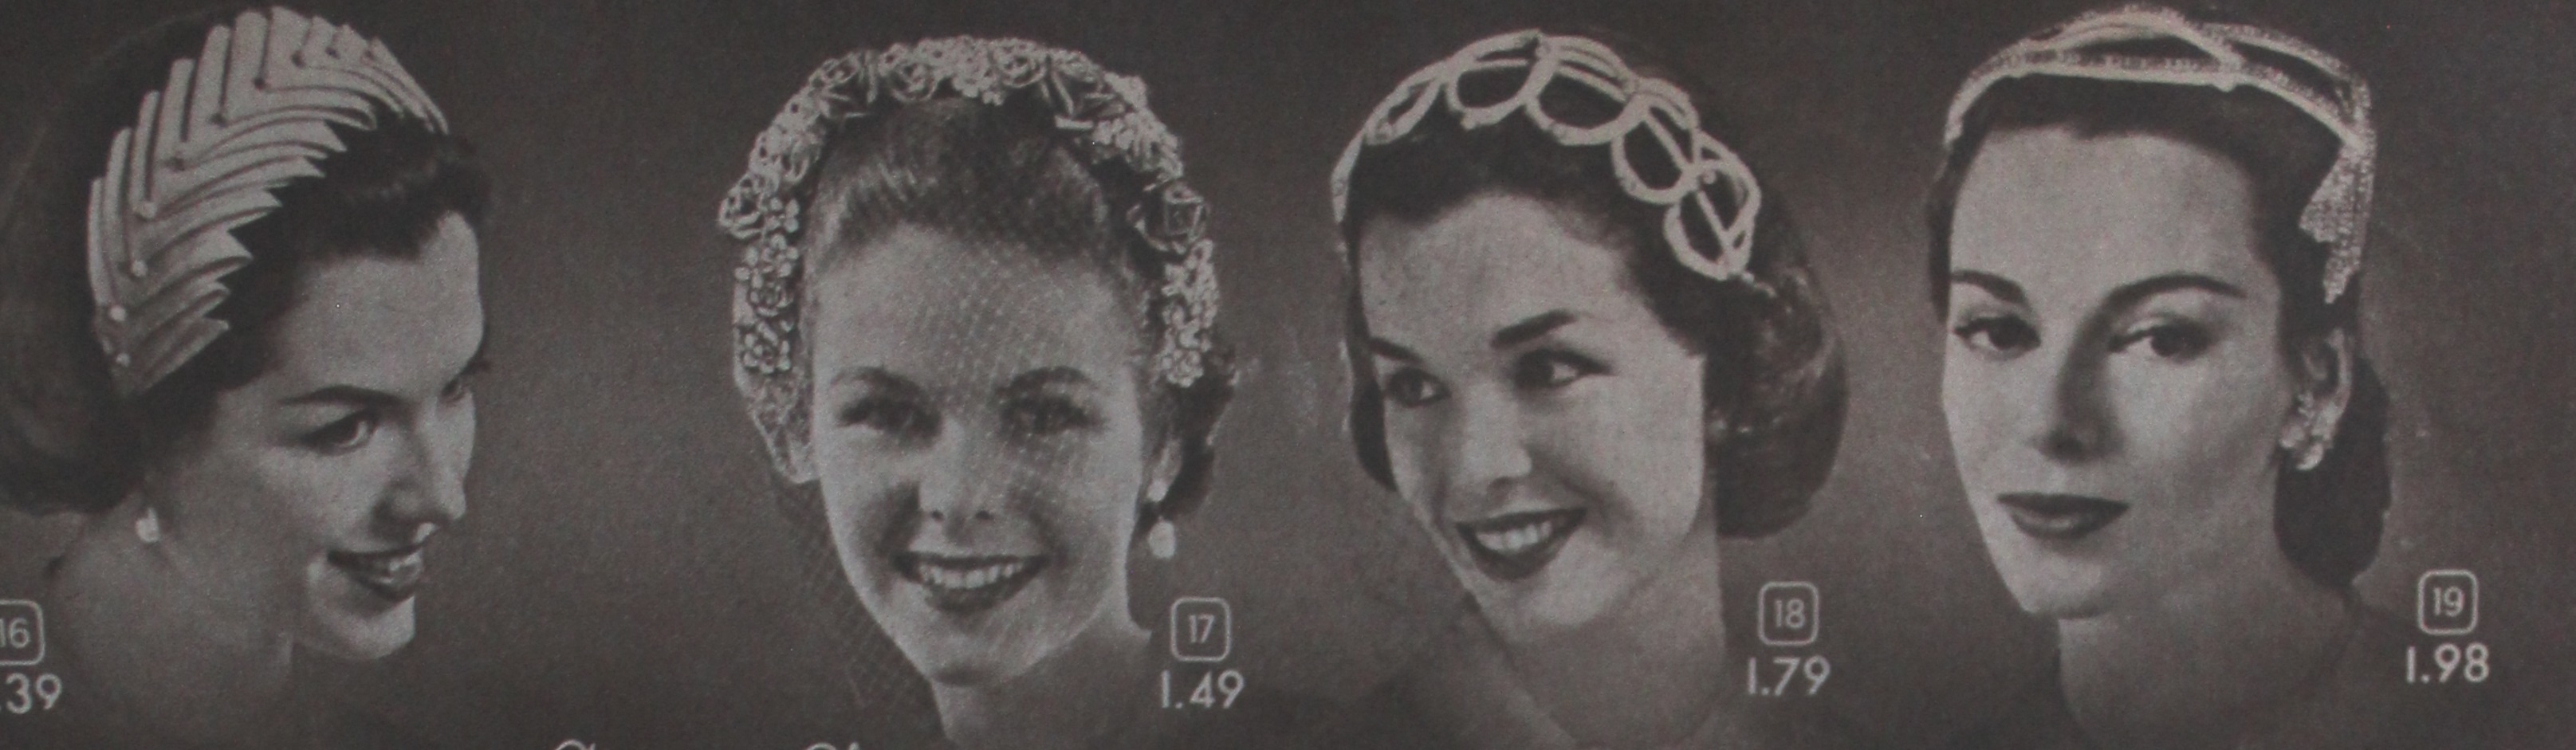 1950s whimsies or fascinator hats women 1957